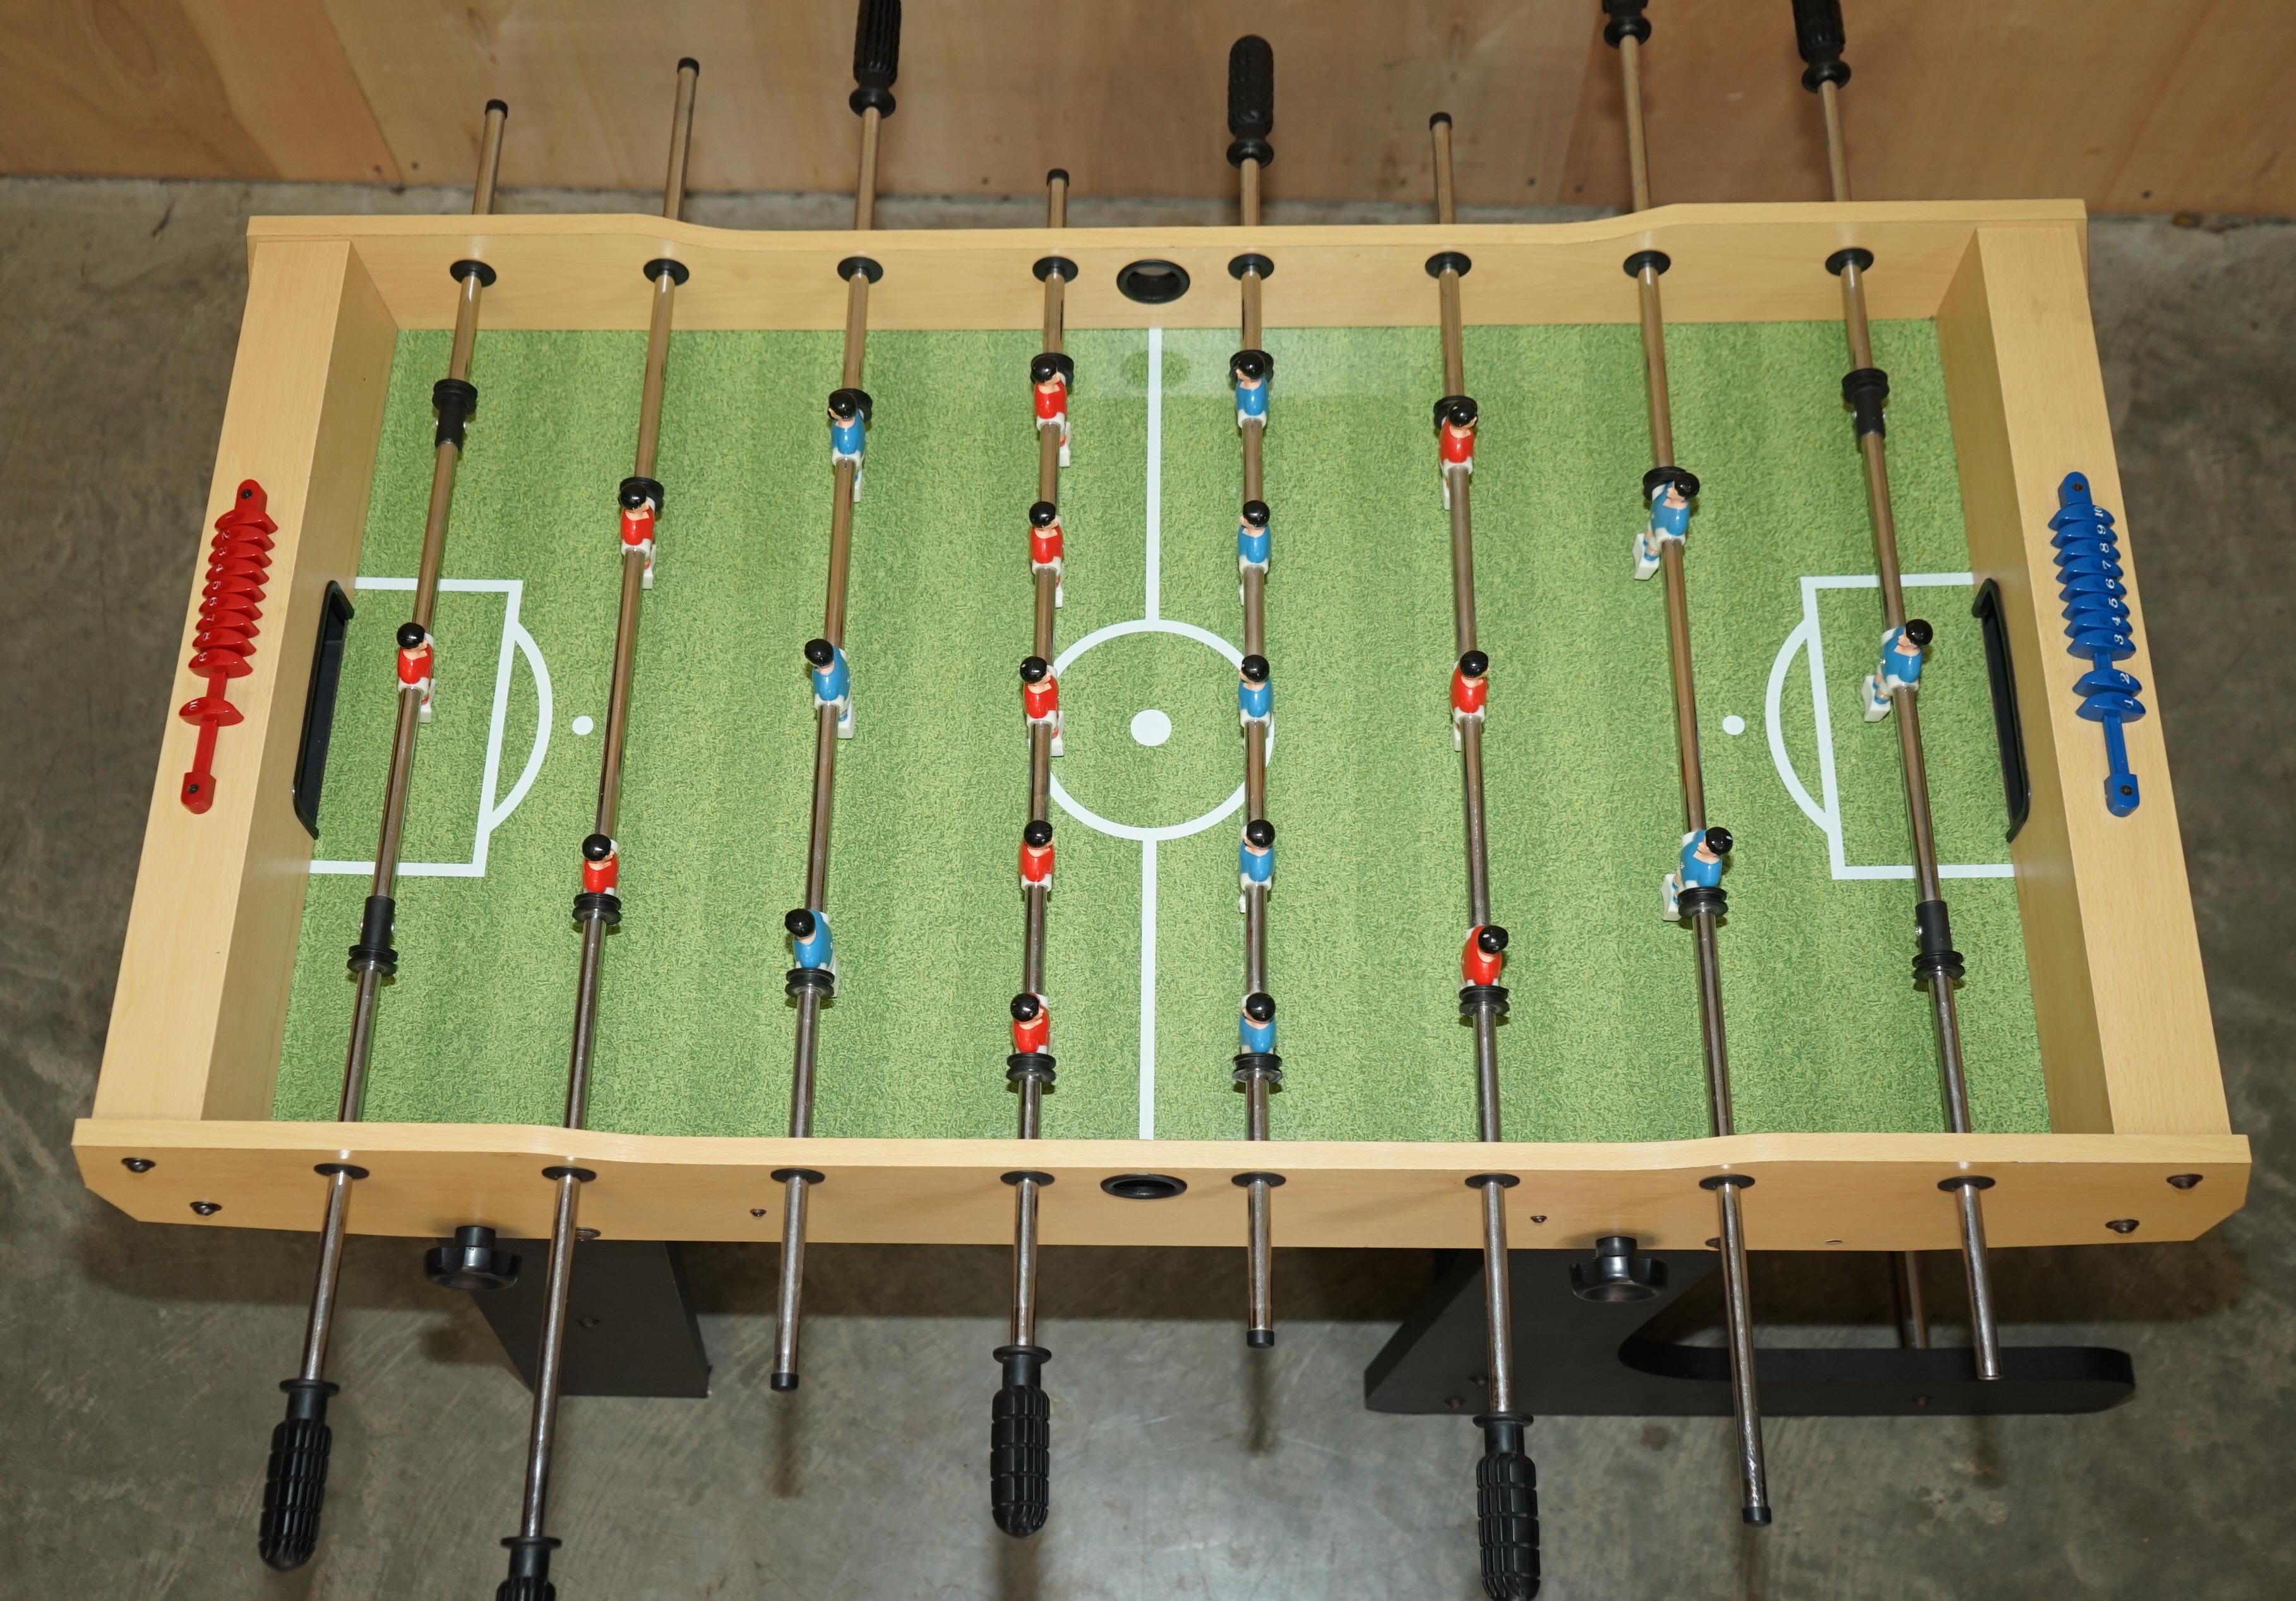 English Table Football / Foosball That Folds Away for Ease of Storage Keep the Kids Busy